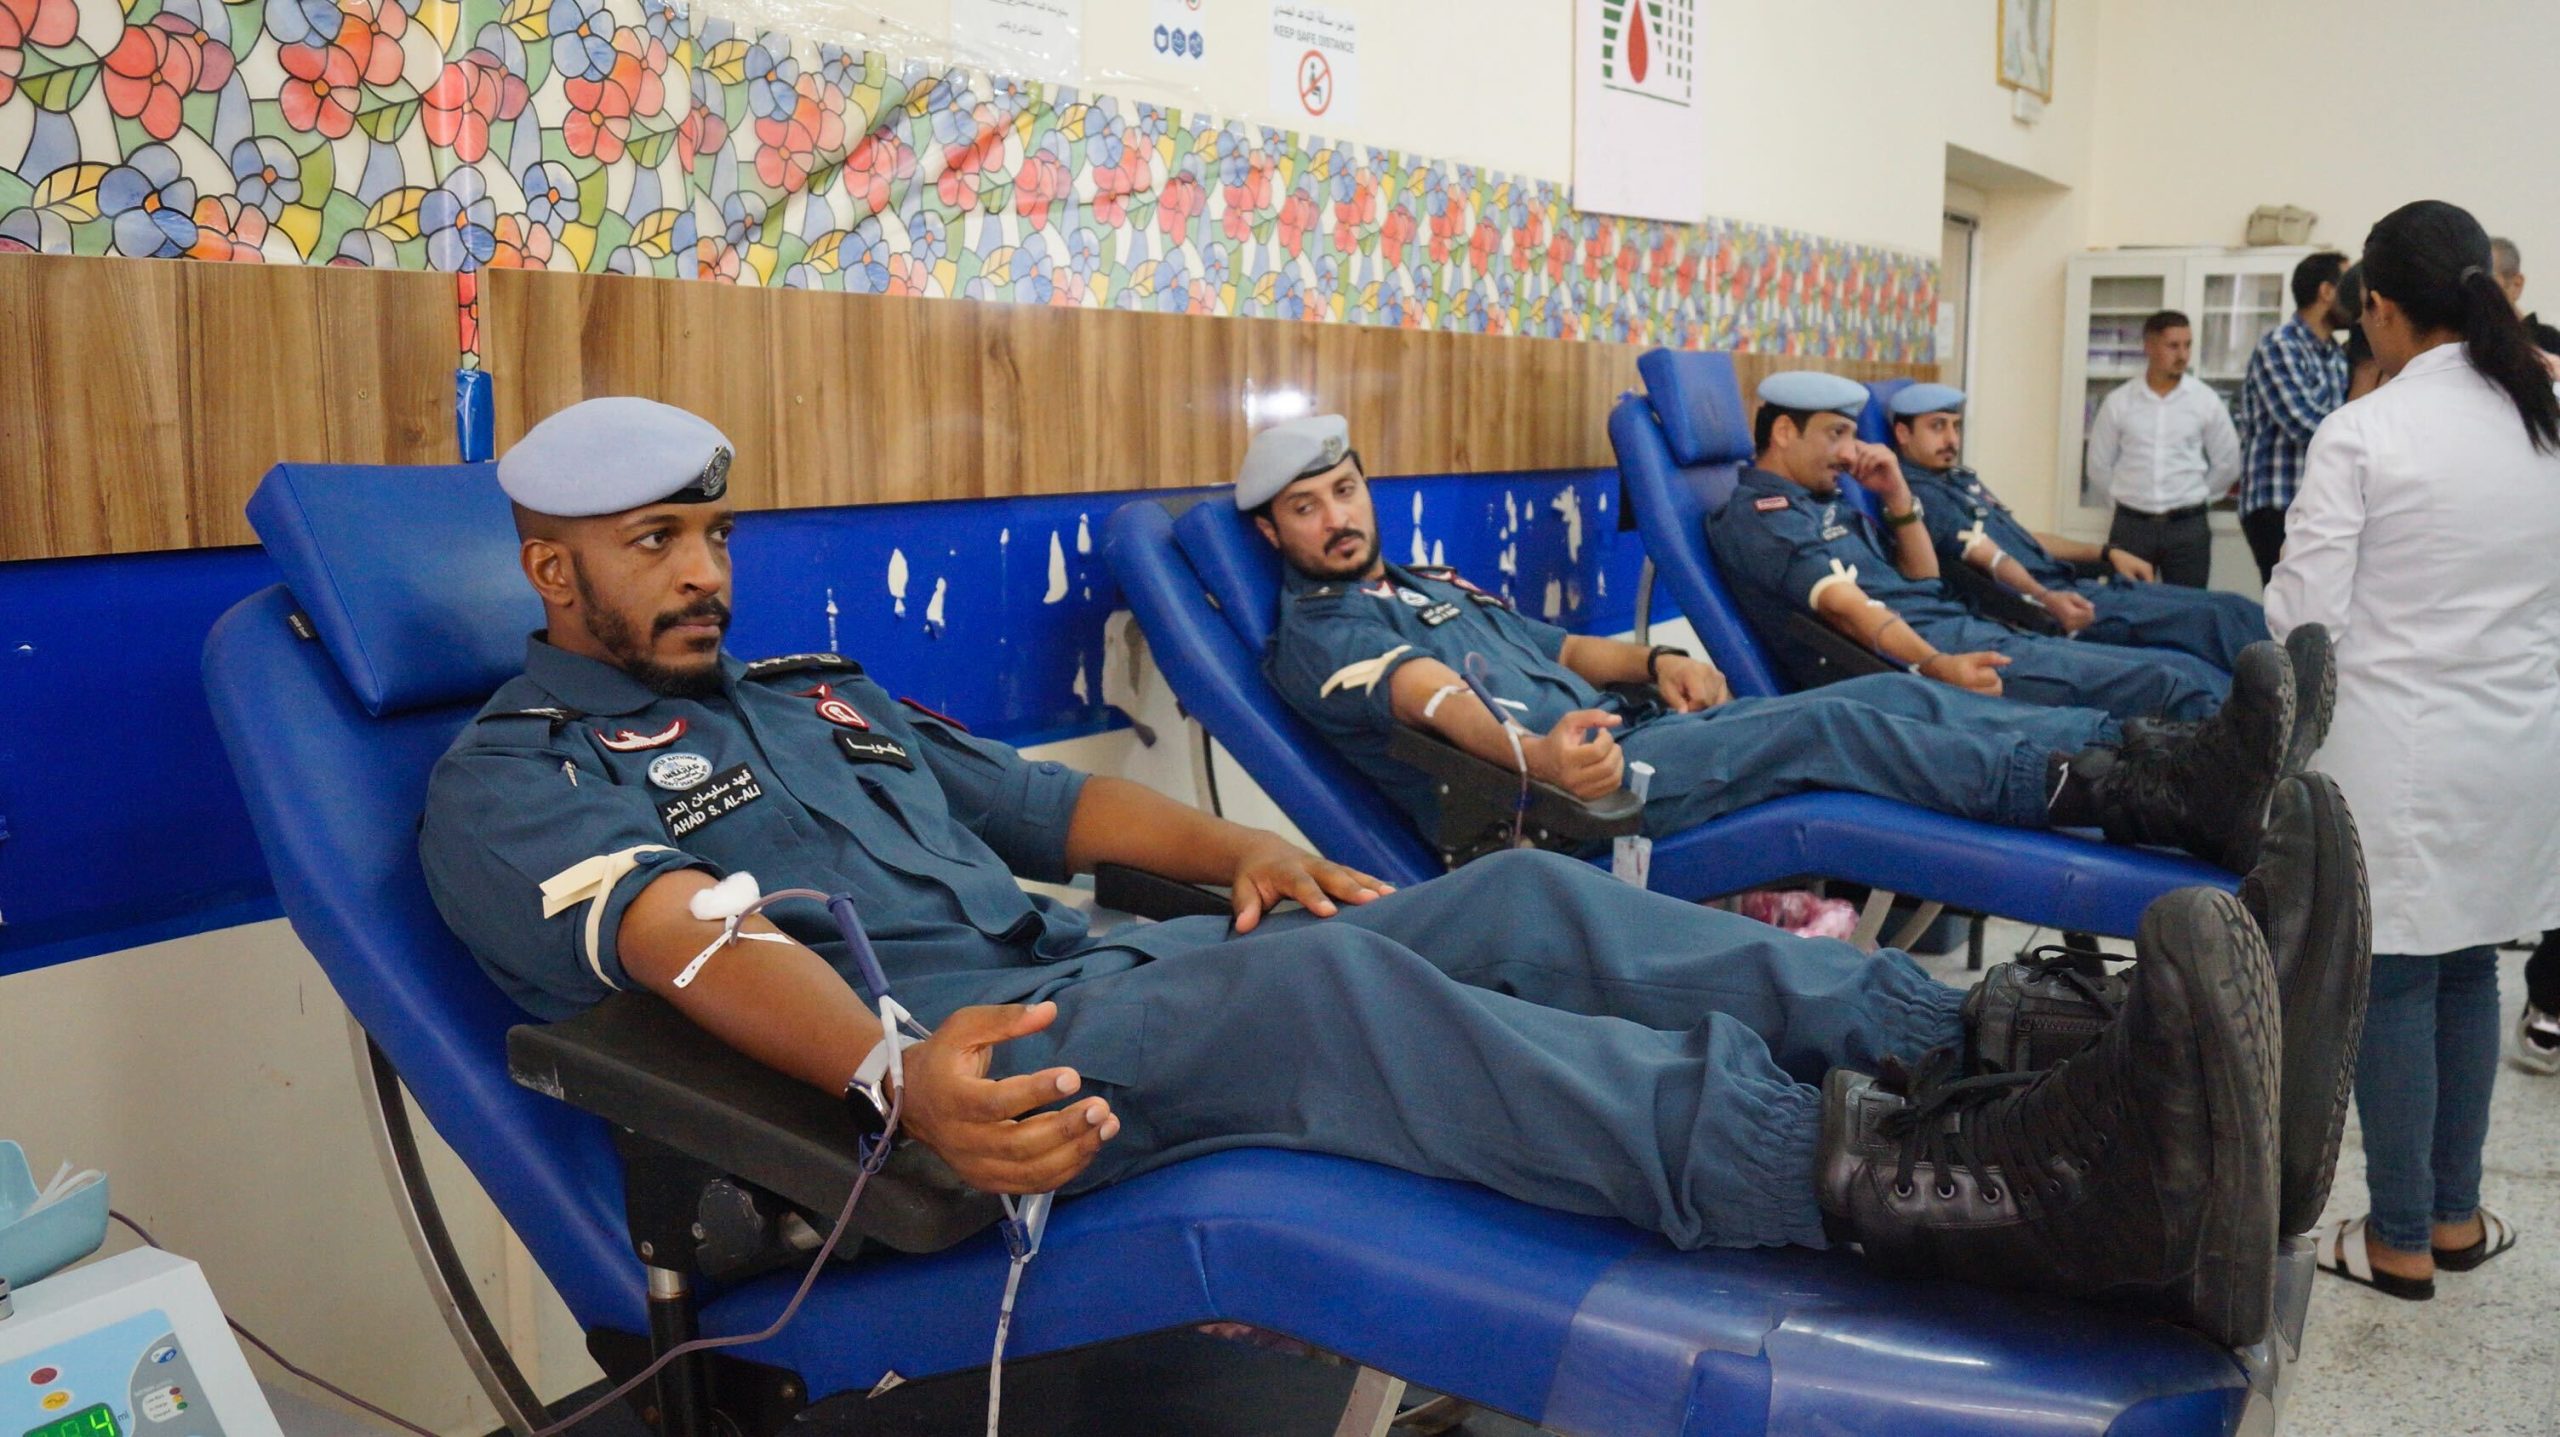 ‘An emotional time’: Qatar’s Lekhwiya joins Morocco residents in donating blood to earthquake victims